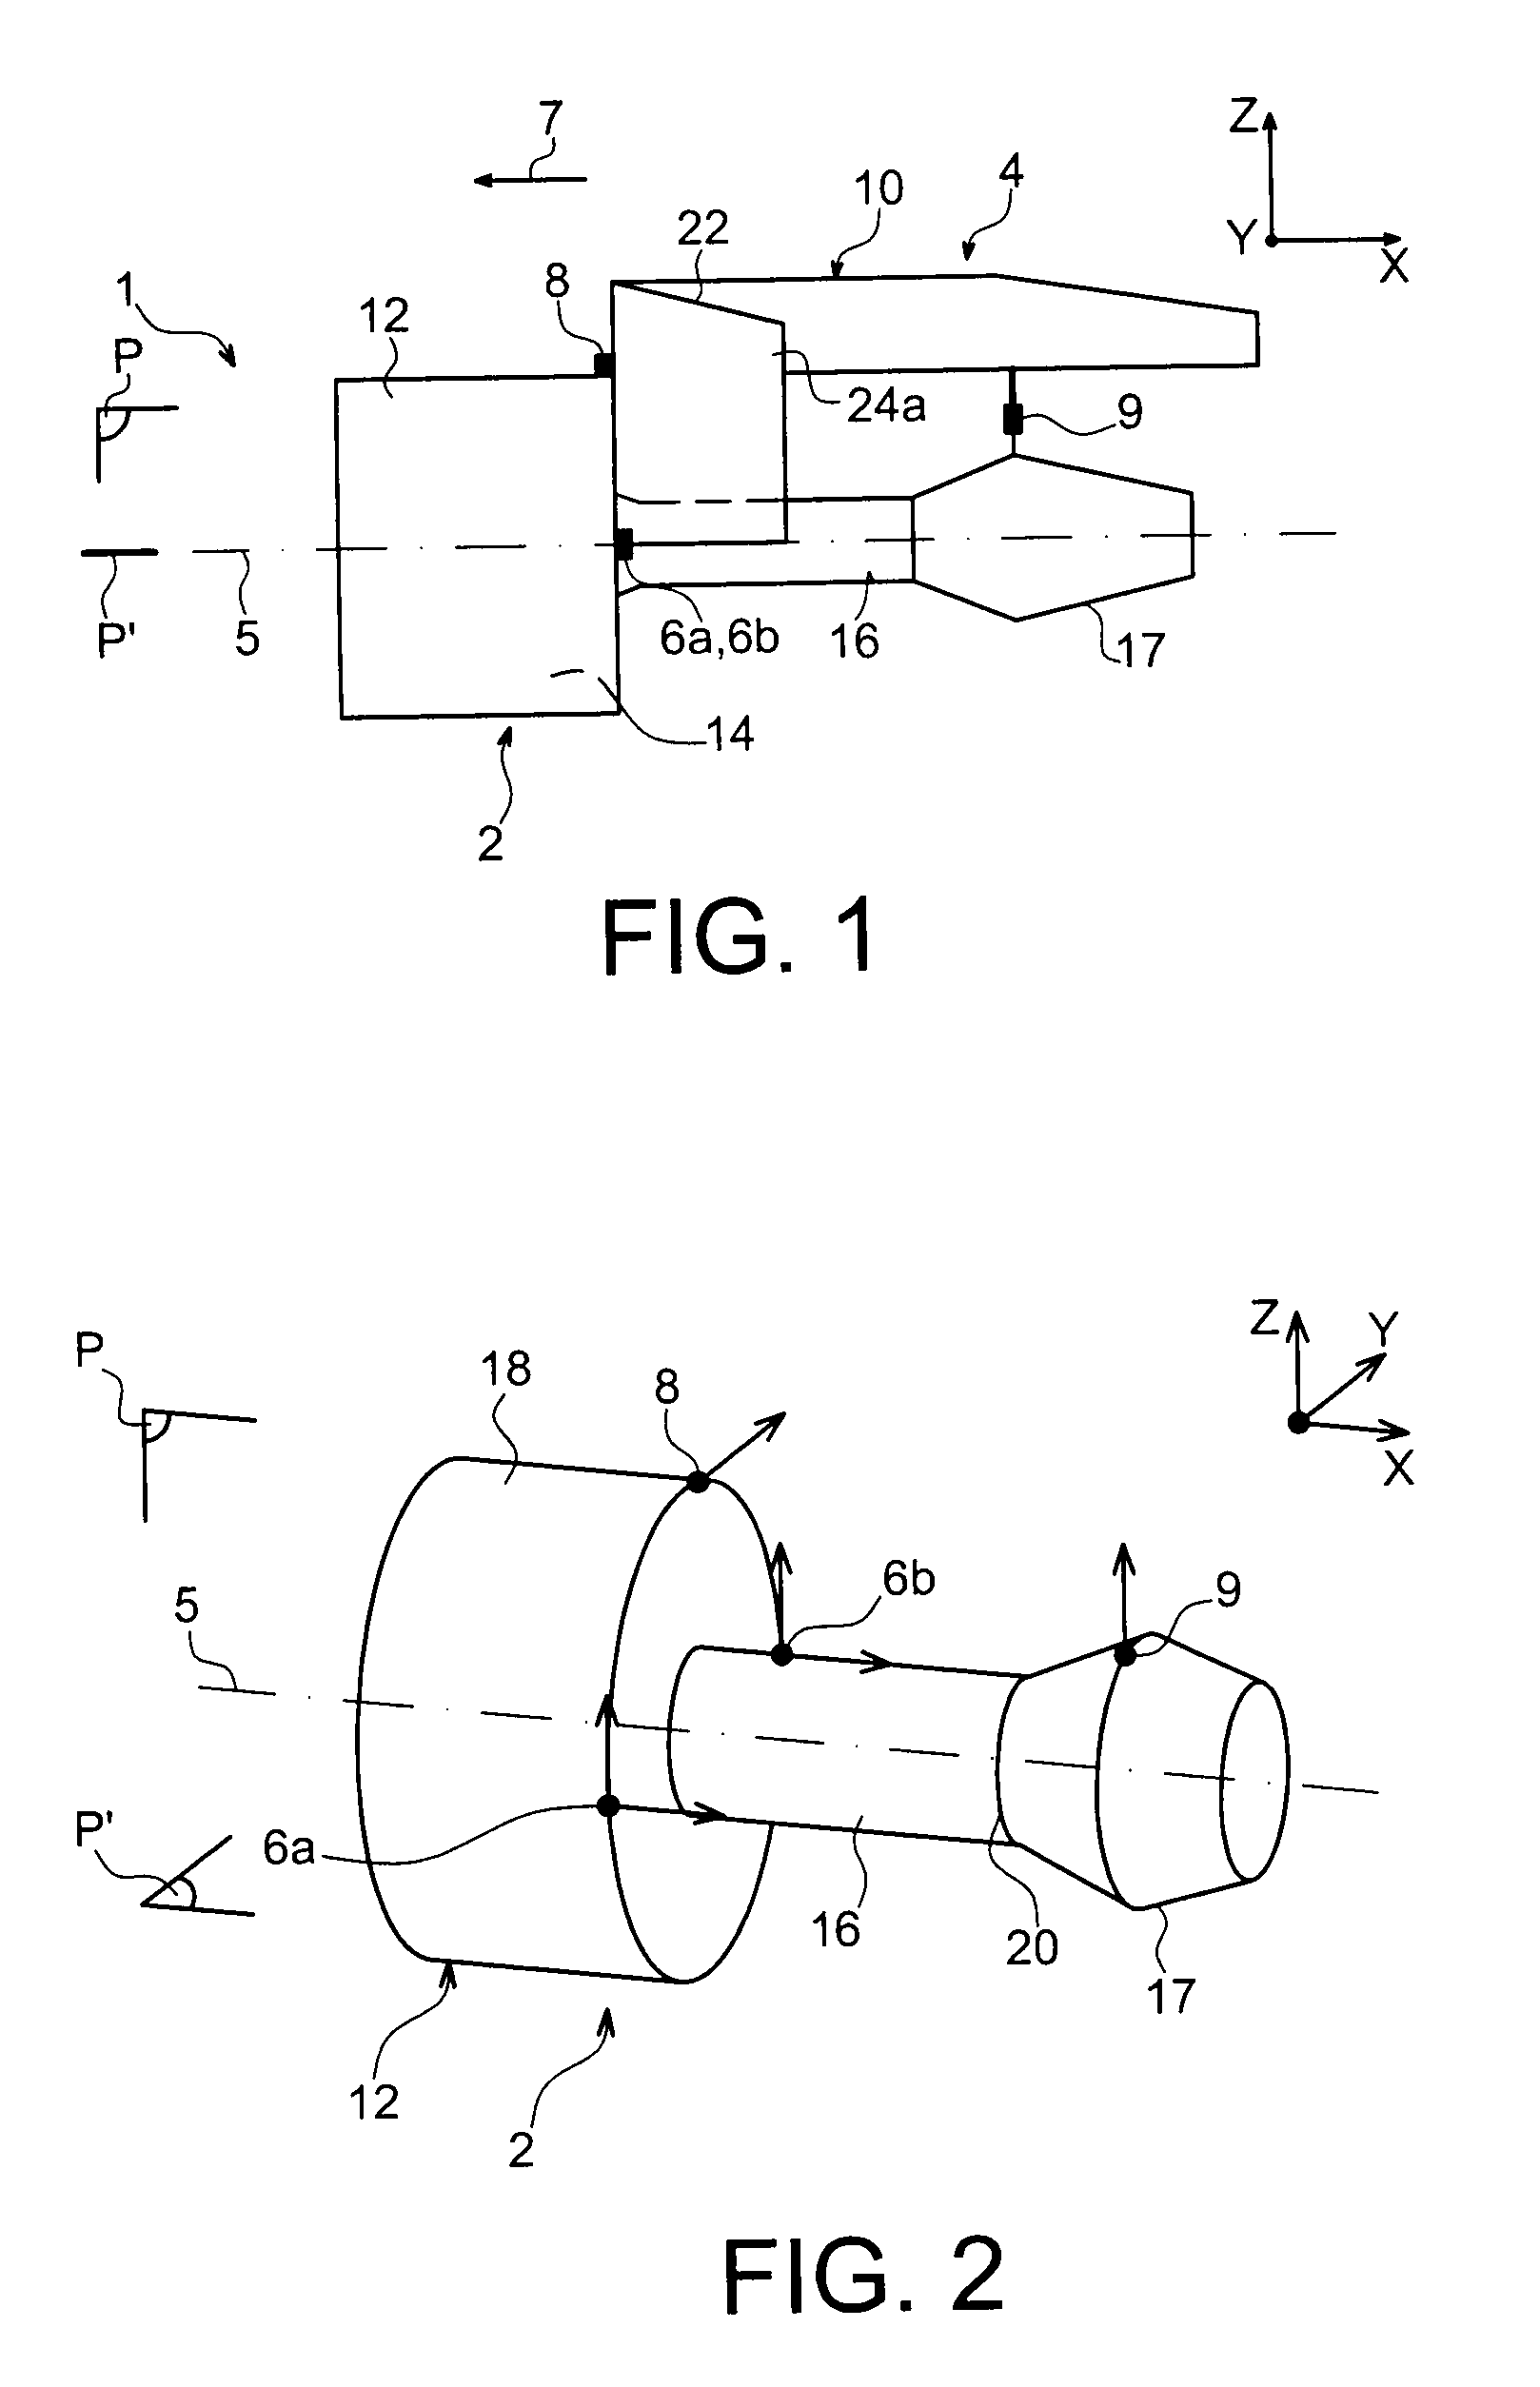 Engine assembly for aircraft